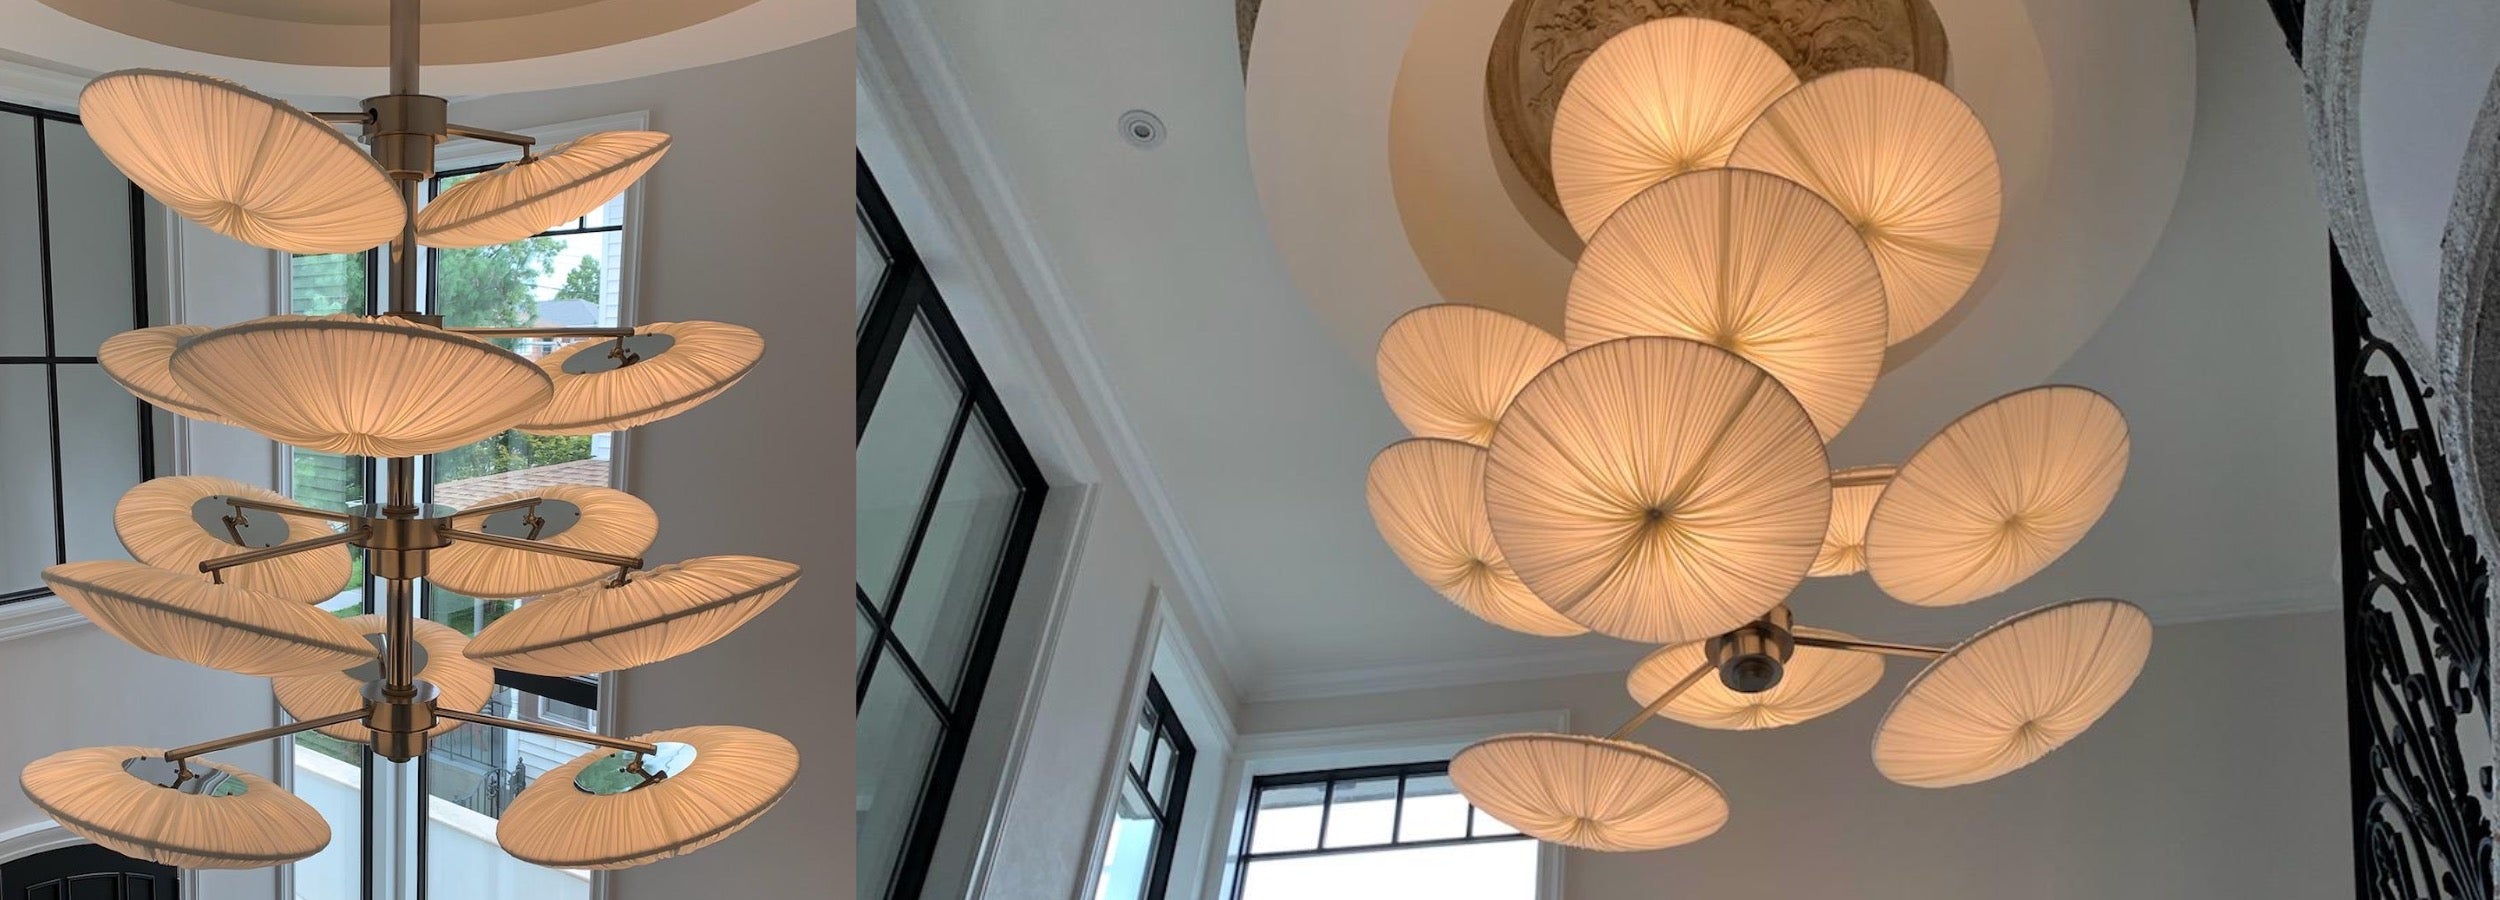 Pleated pendant light combined into a chandelier style